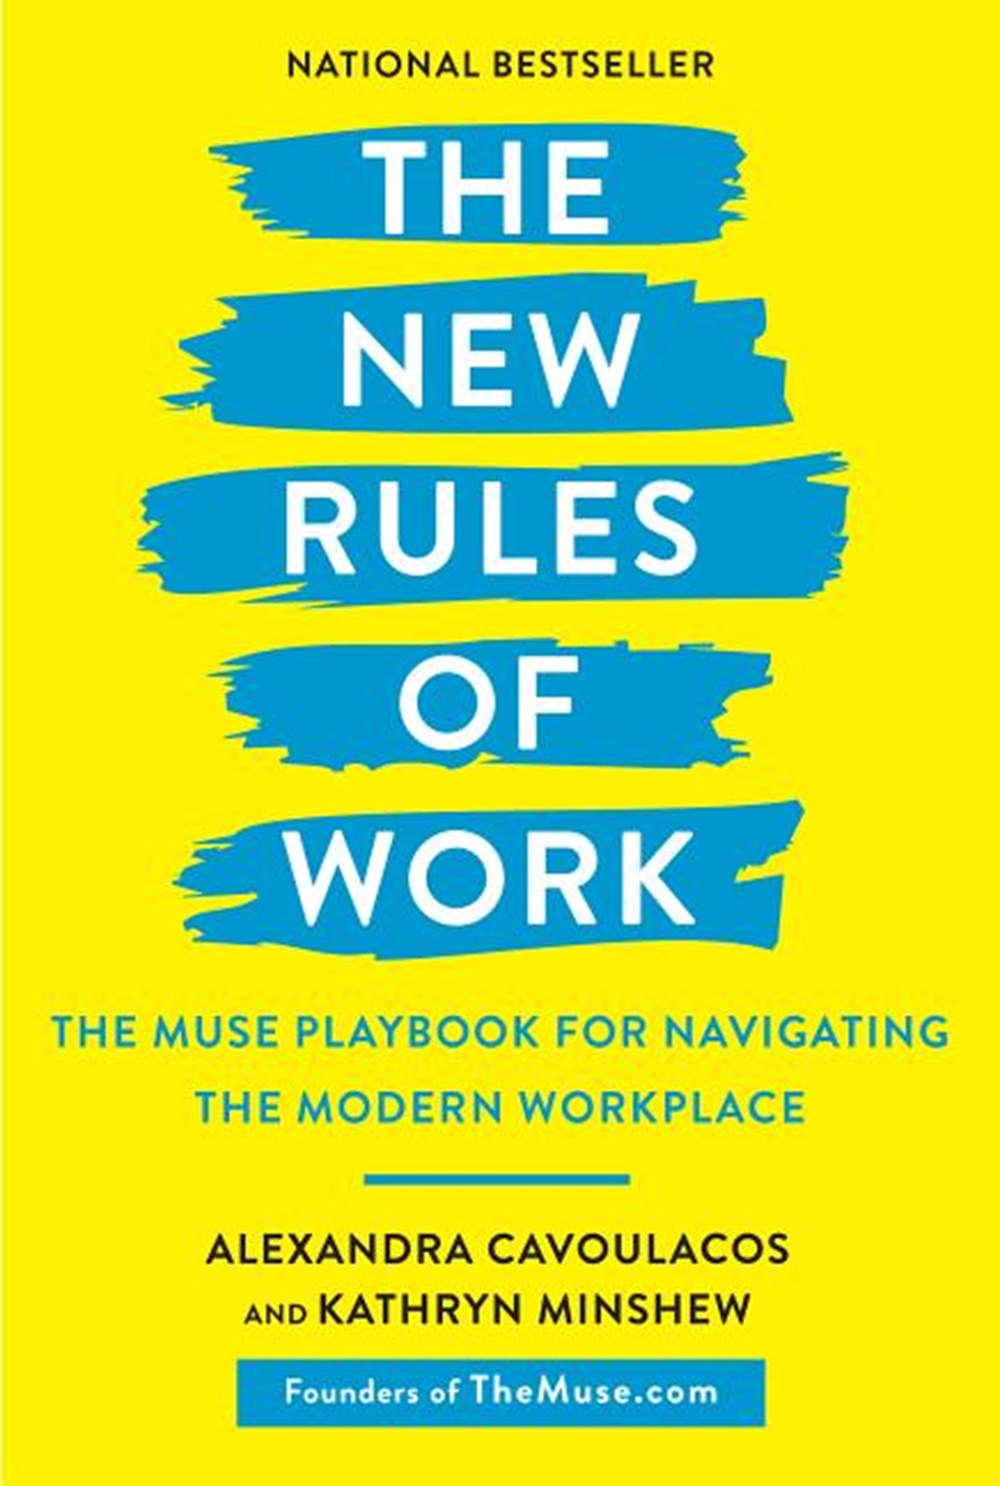 New Rules of Work: The Muse Playbook for Navigating the Modern Workplace